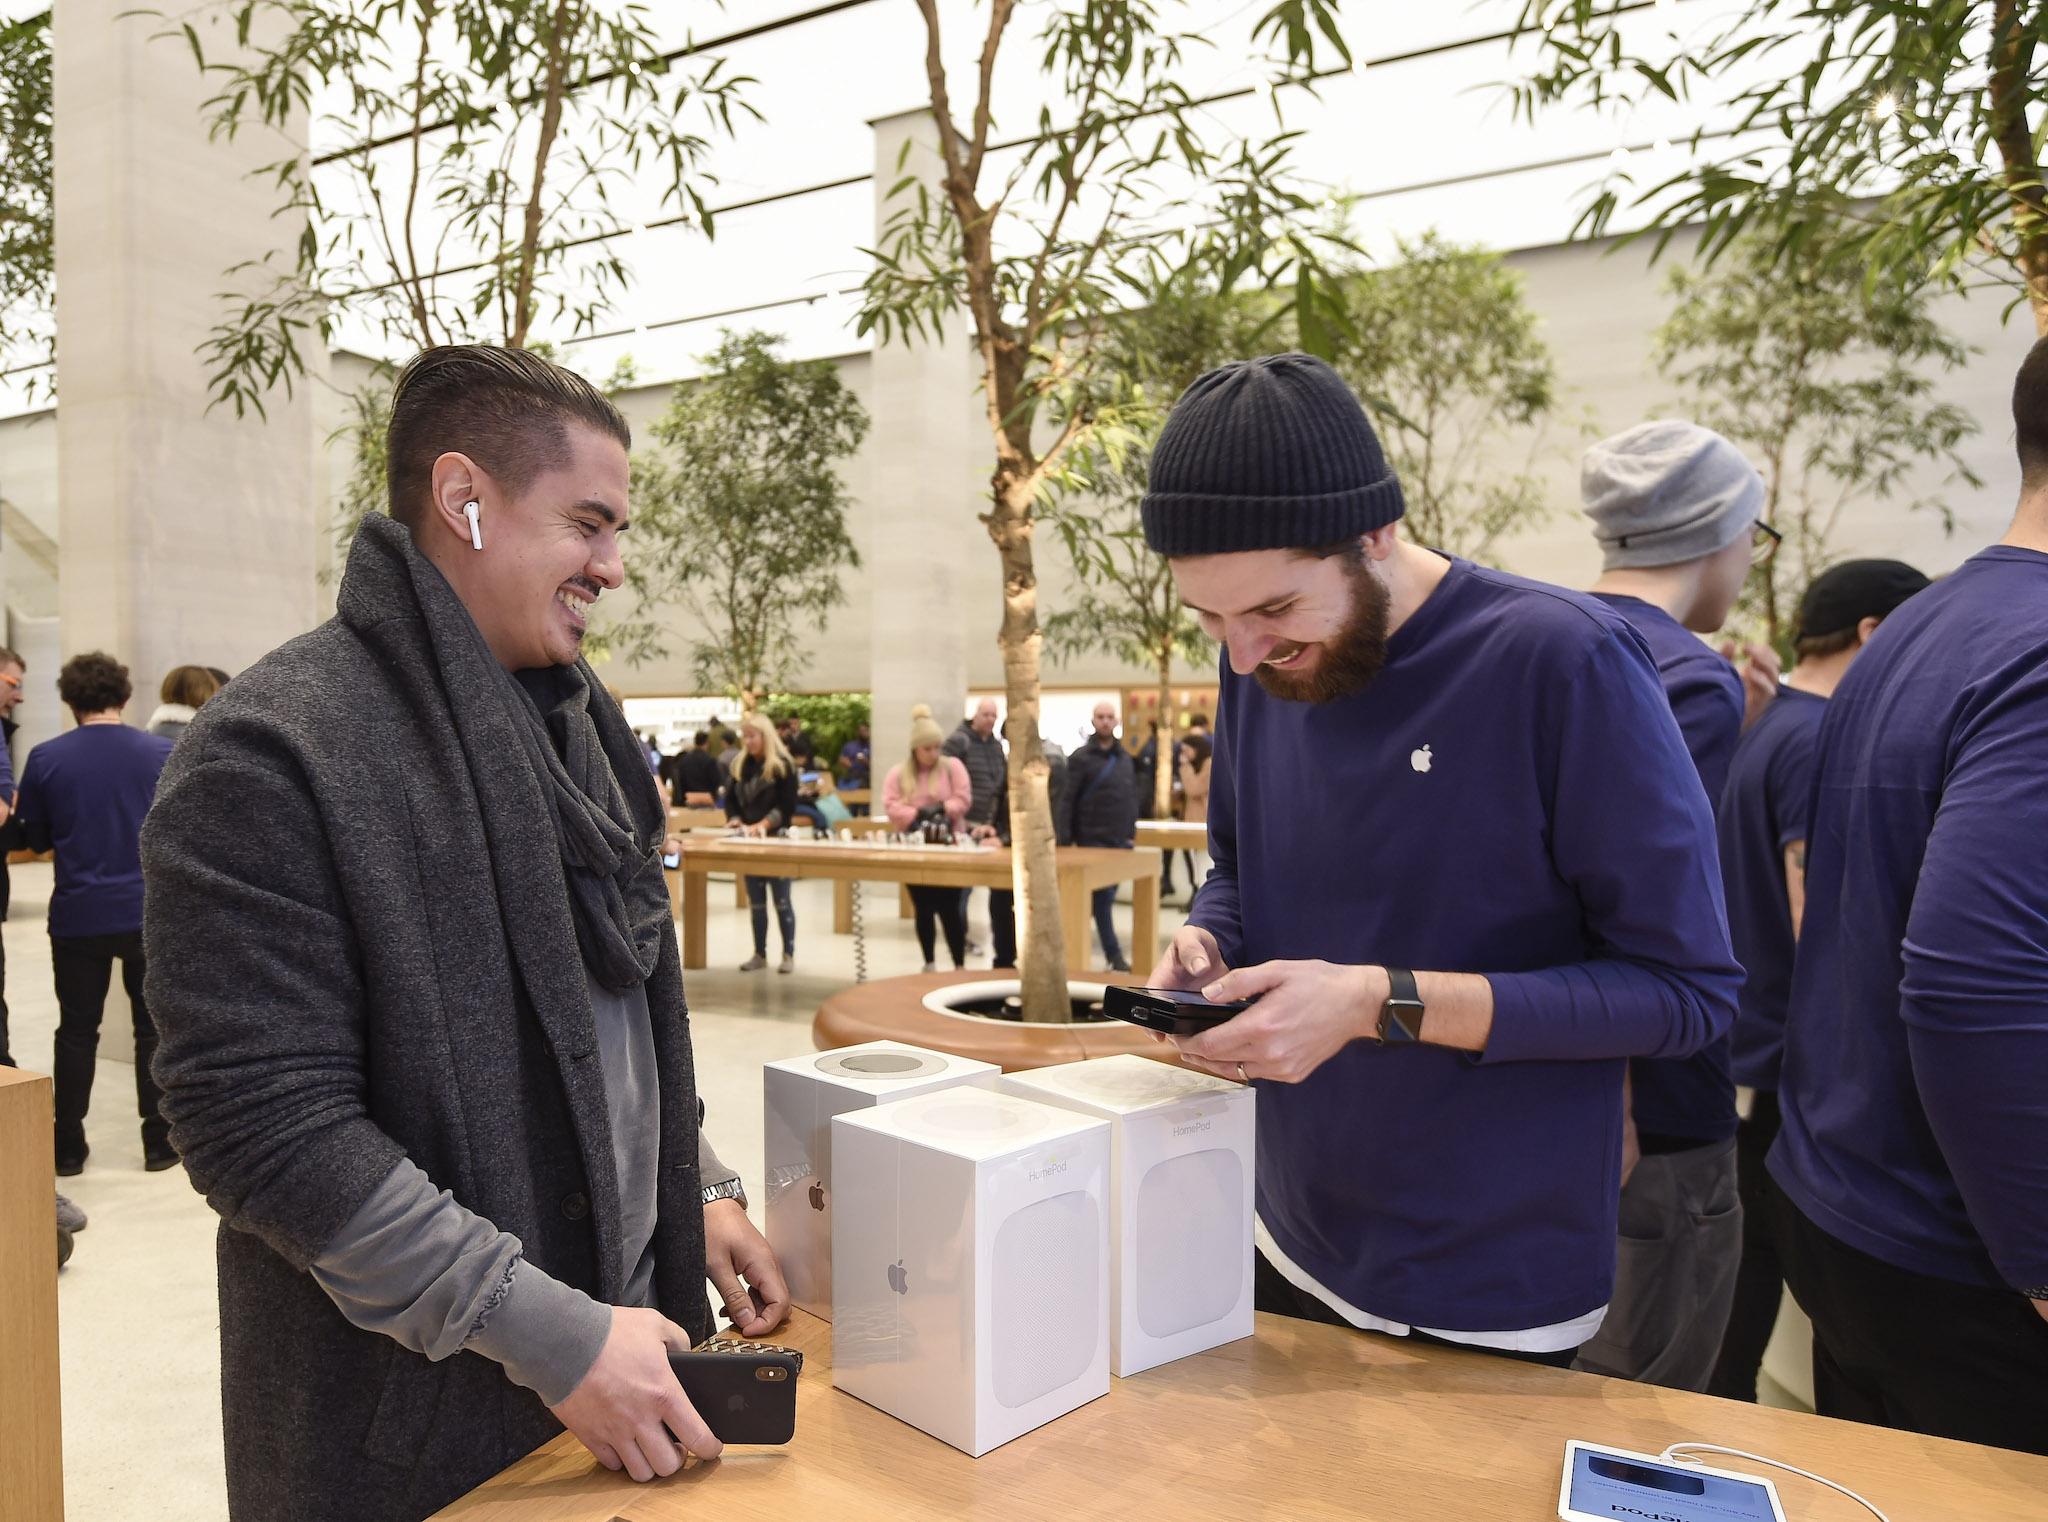 A customer looks at The Apple HomePod, which is now available in stores in the US, UK and Australia, at Apple Store on Regent Street on February 9, 2018 in London, England